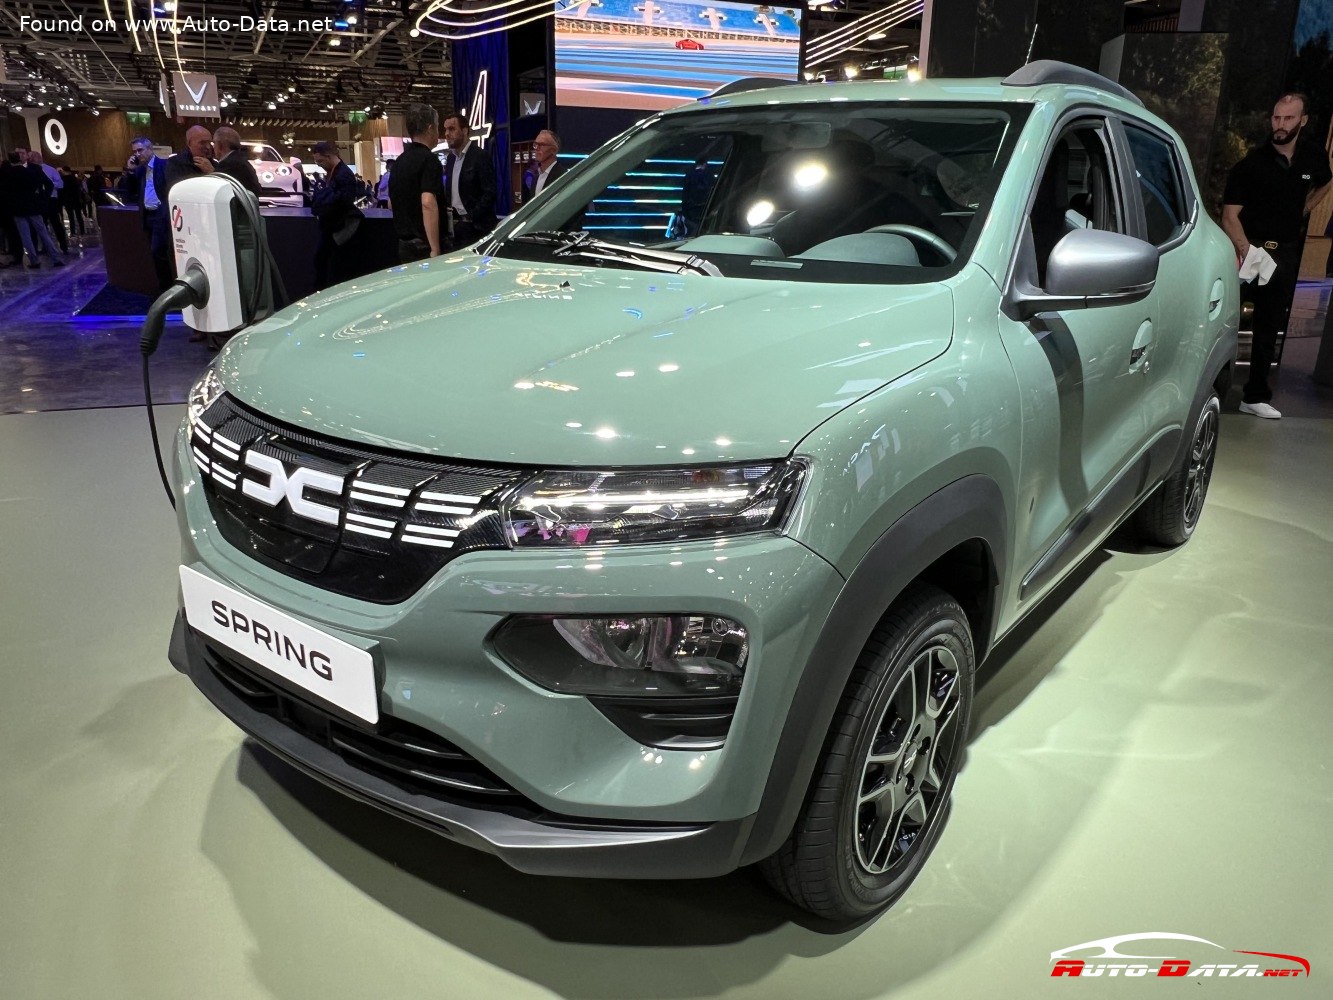 2022 Dacia Spring (facelift 2022) 26.8 kWh (45 PS) Electric